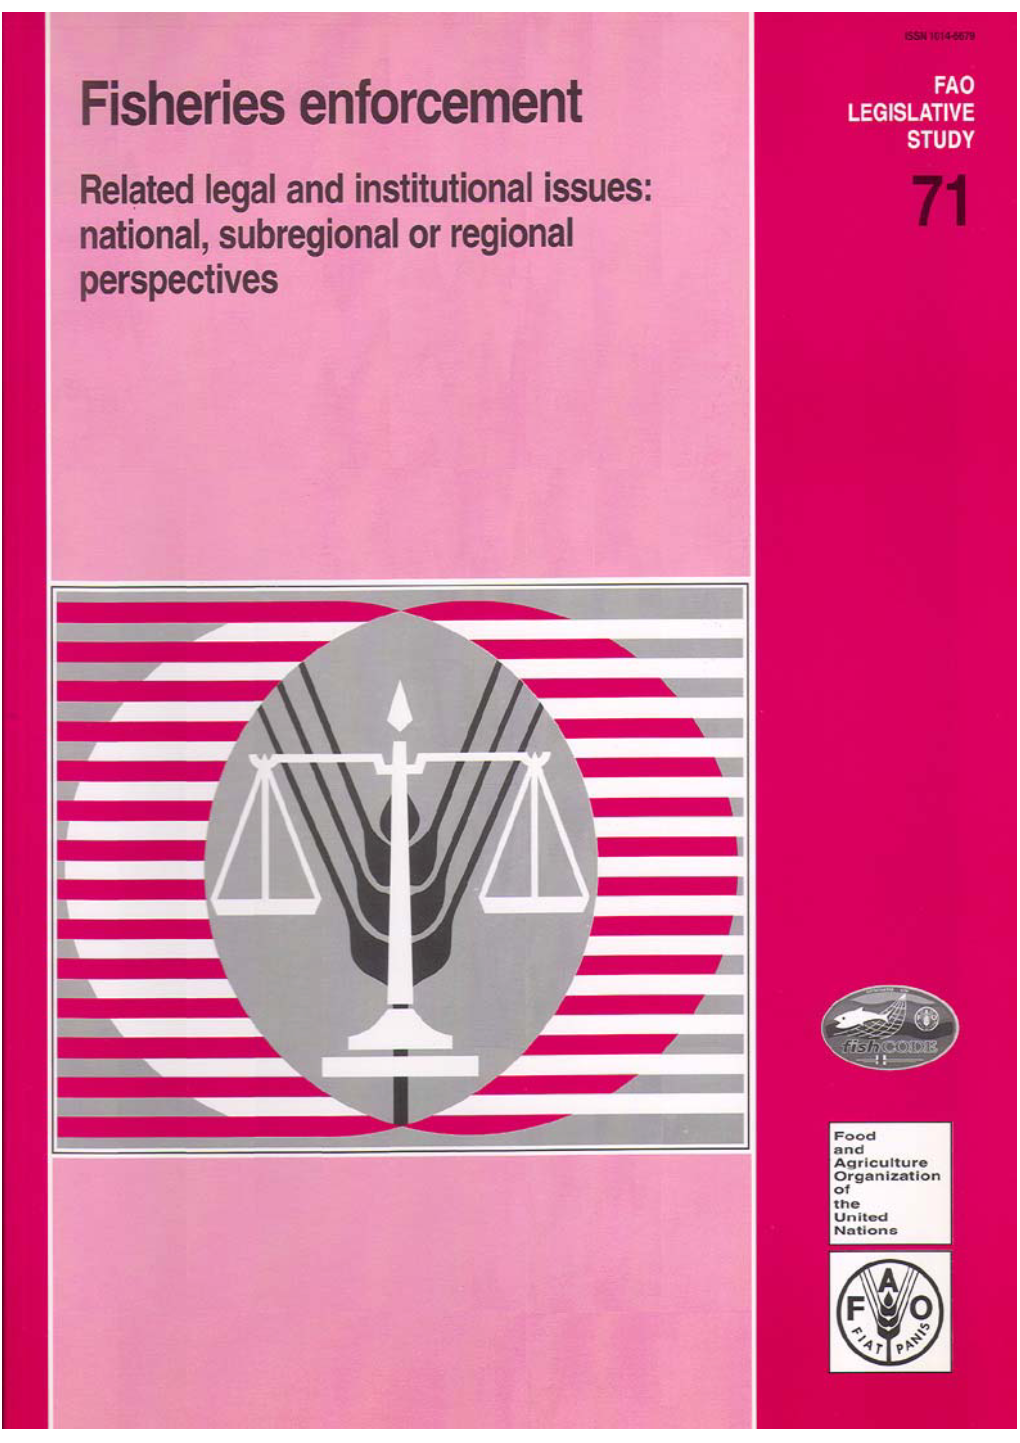 Fisheries Enforcement Fao Related Legal and Institutional Issues Legislative National, Sub-Regional Or Study Regional Perspectives